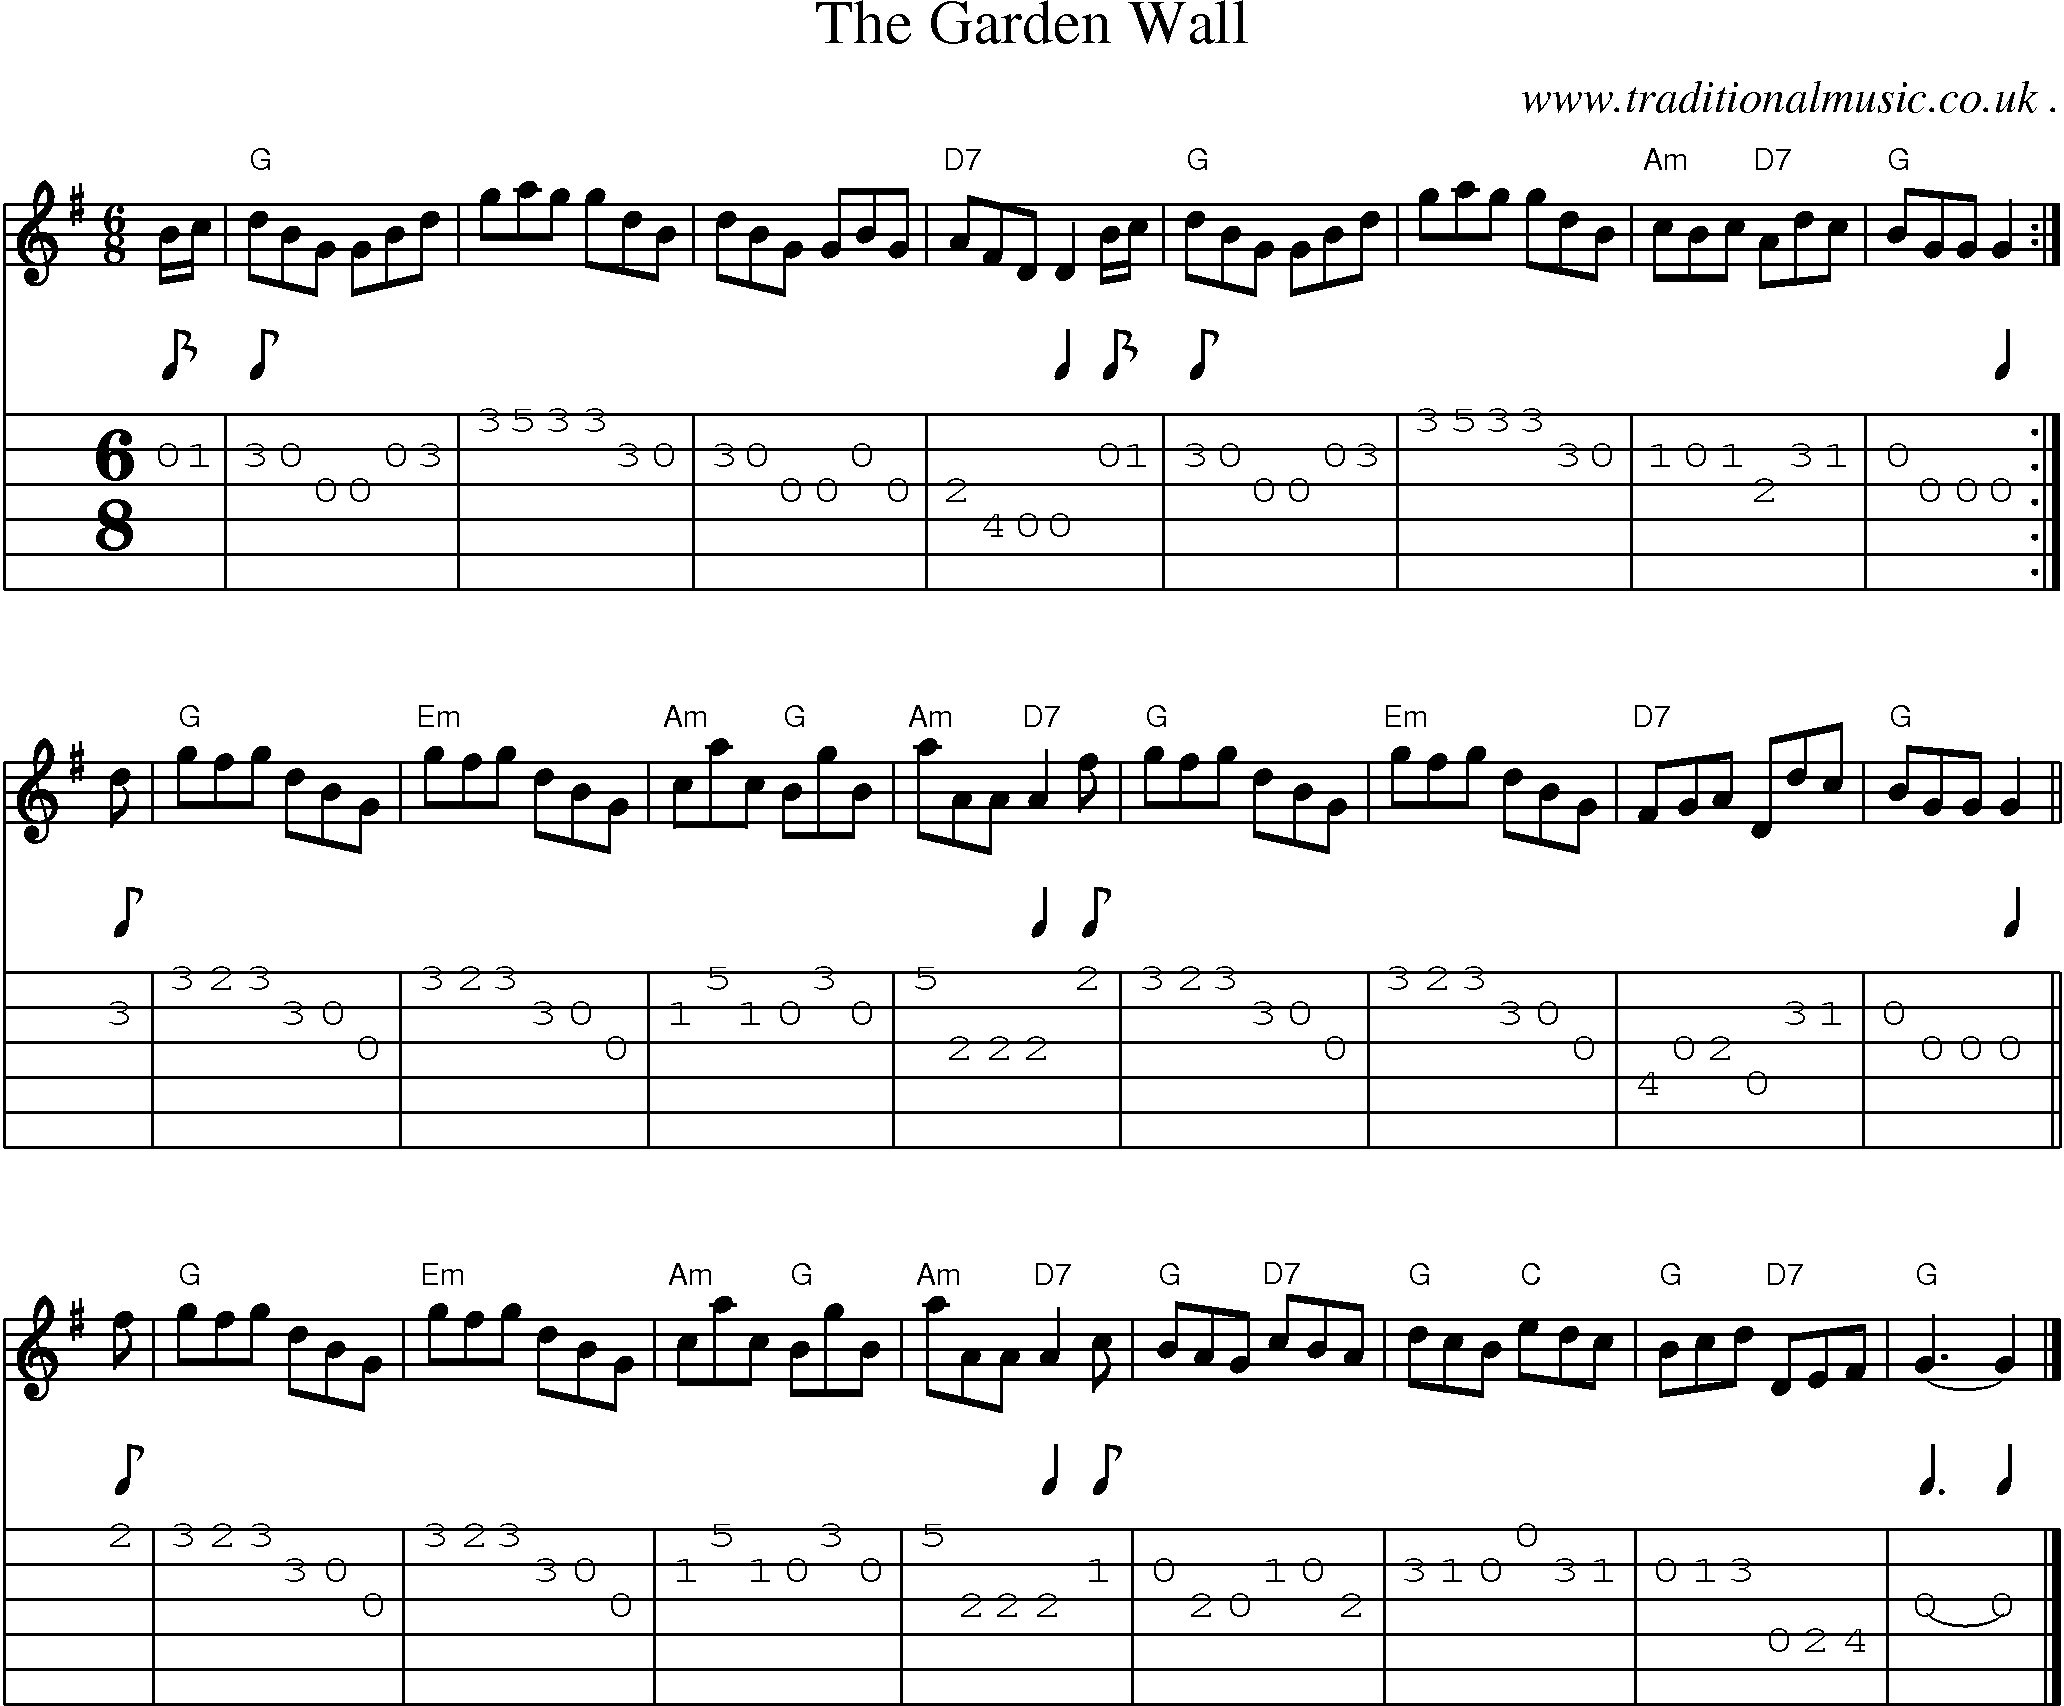 Sheet-music  score, Chords and Guitar Tabs for The Garden Wall